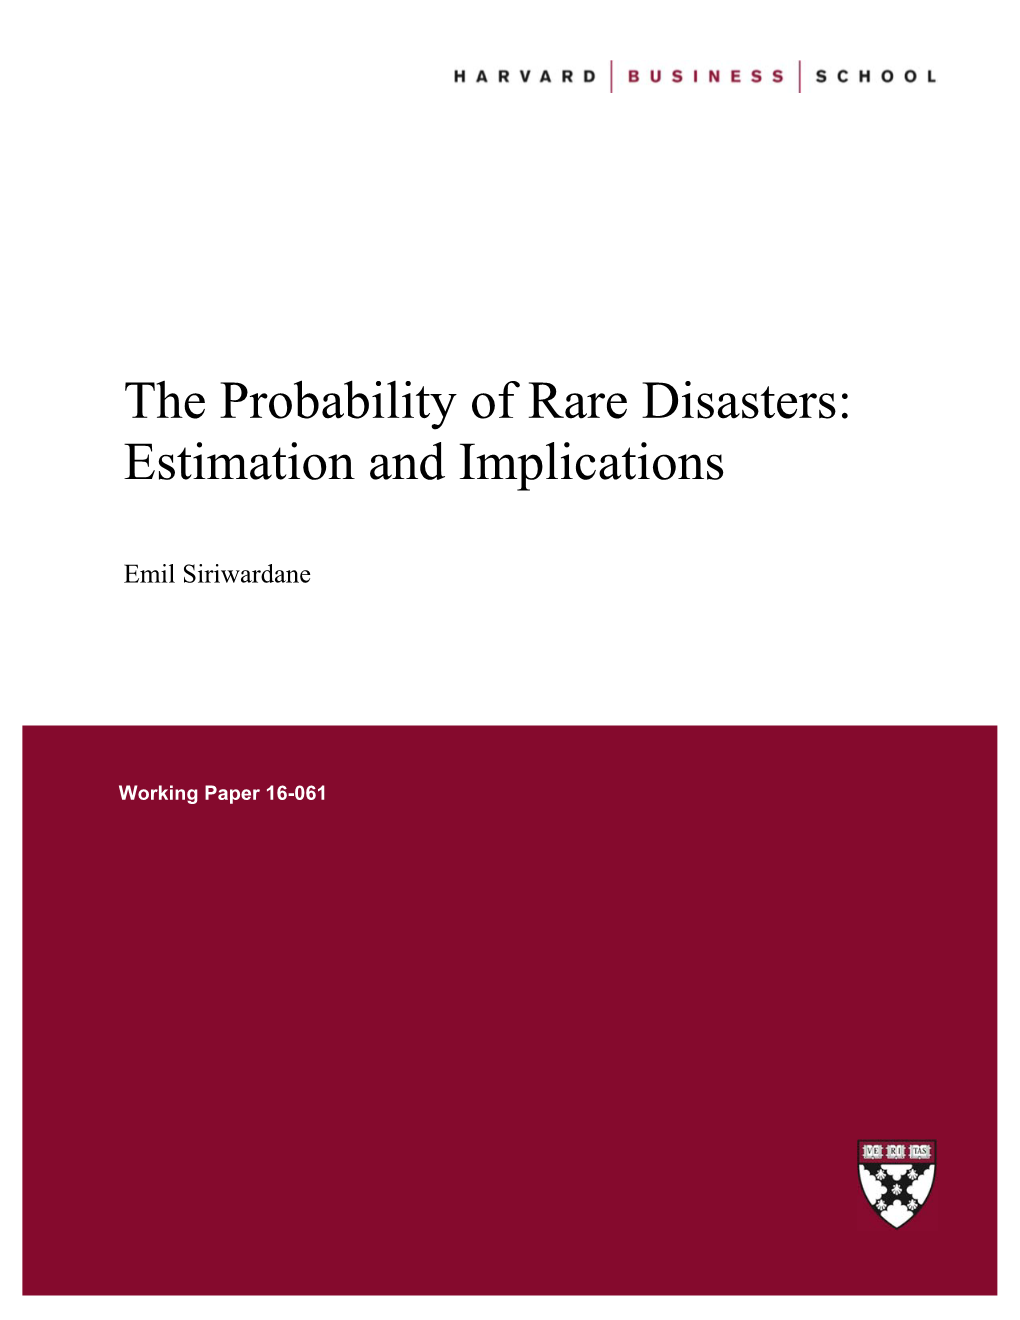 The Probability of Rare Disasters: Estimation and Implications